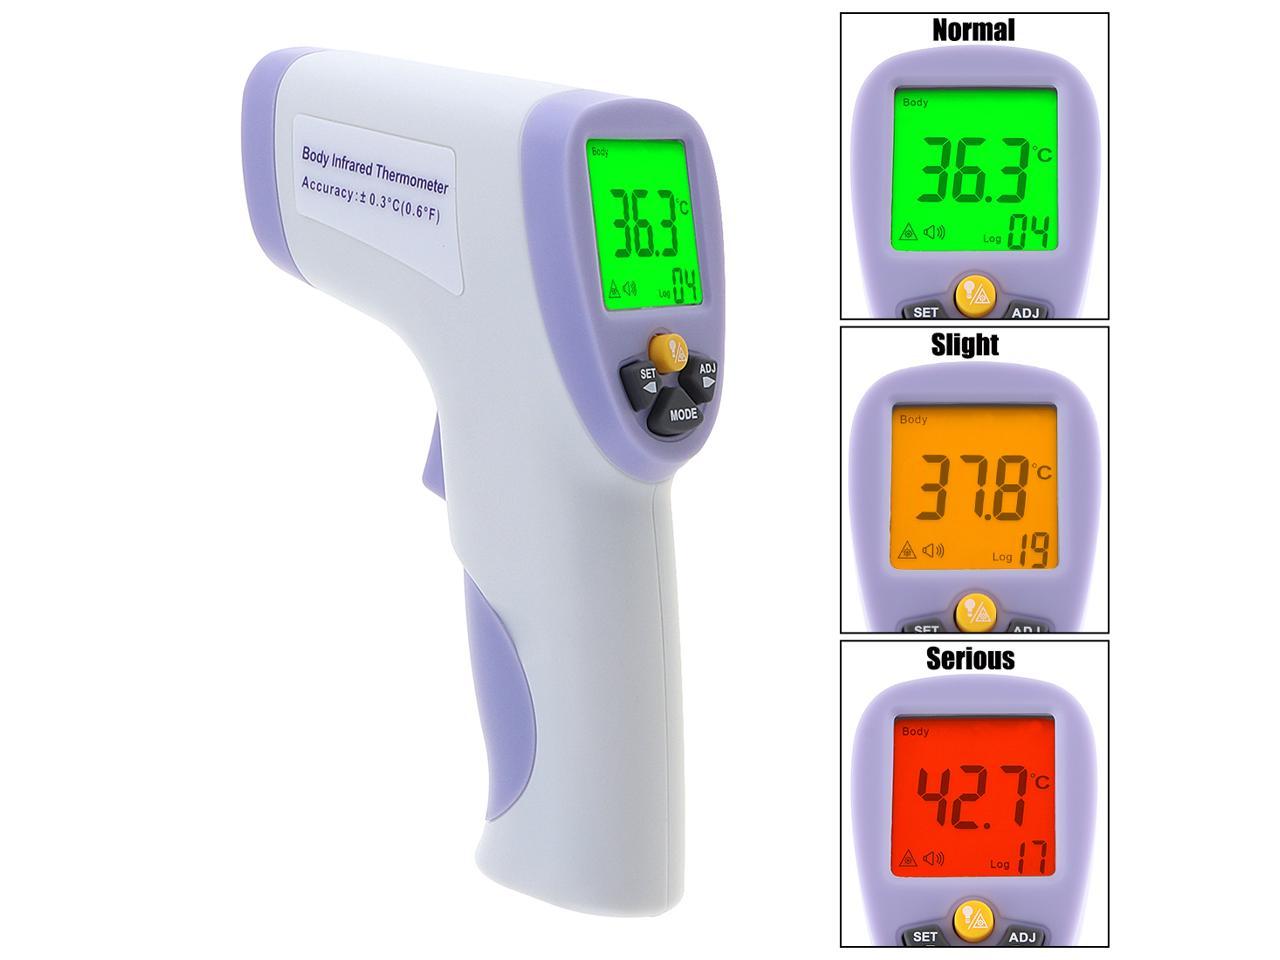 NonContact Forehead Infrared Thermometer Baby Adult Body Digital Precision Meter